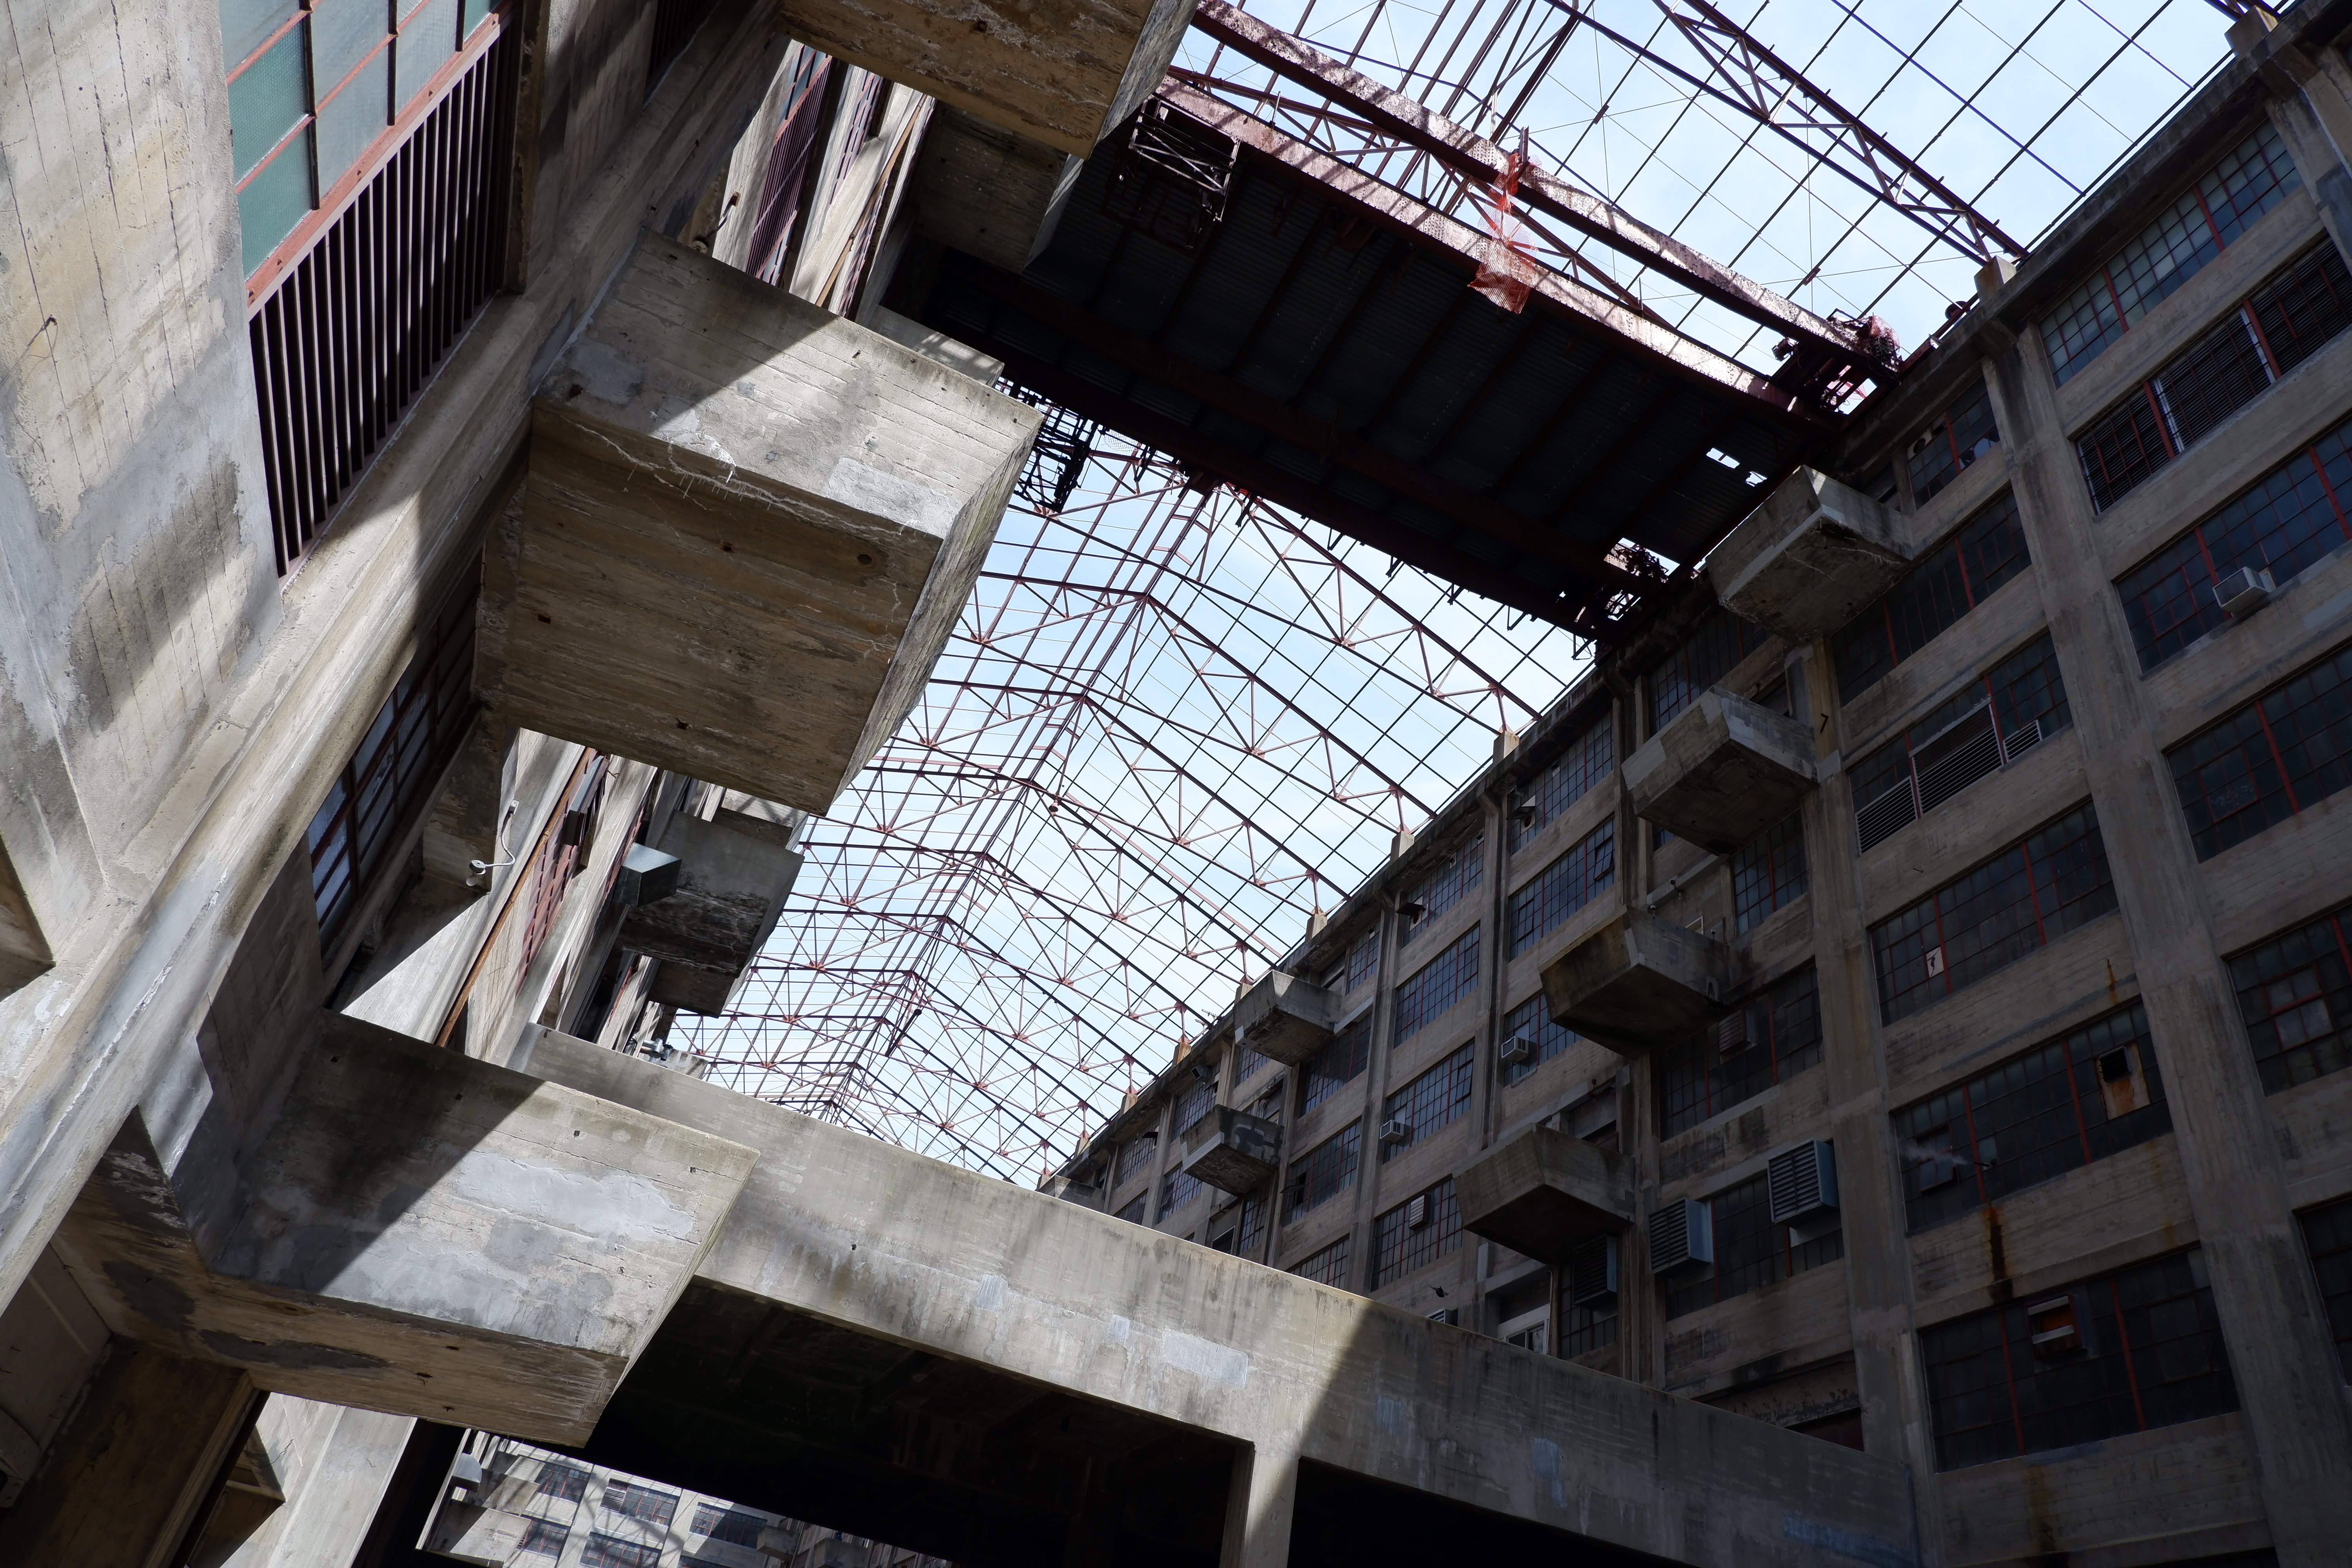 Photo of atrium of the Army Terminal showing concrete balconies and skylight